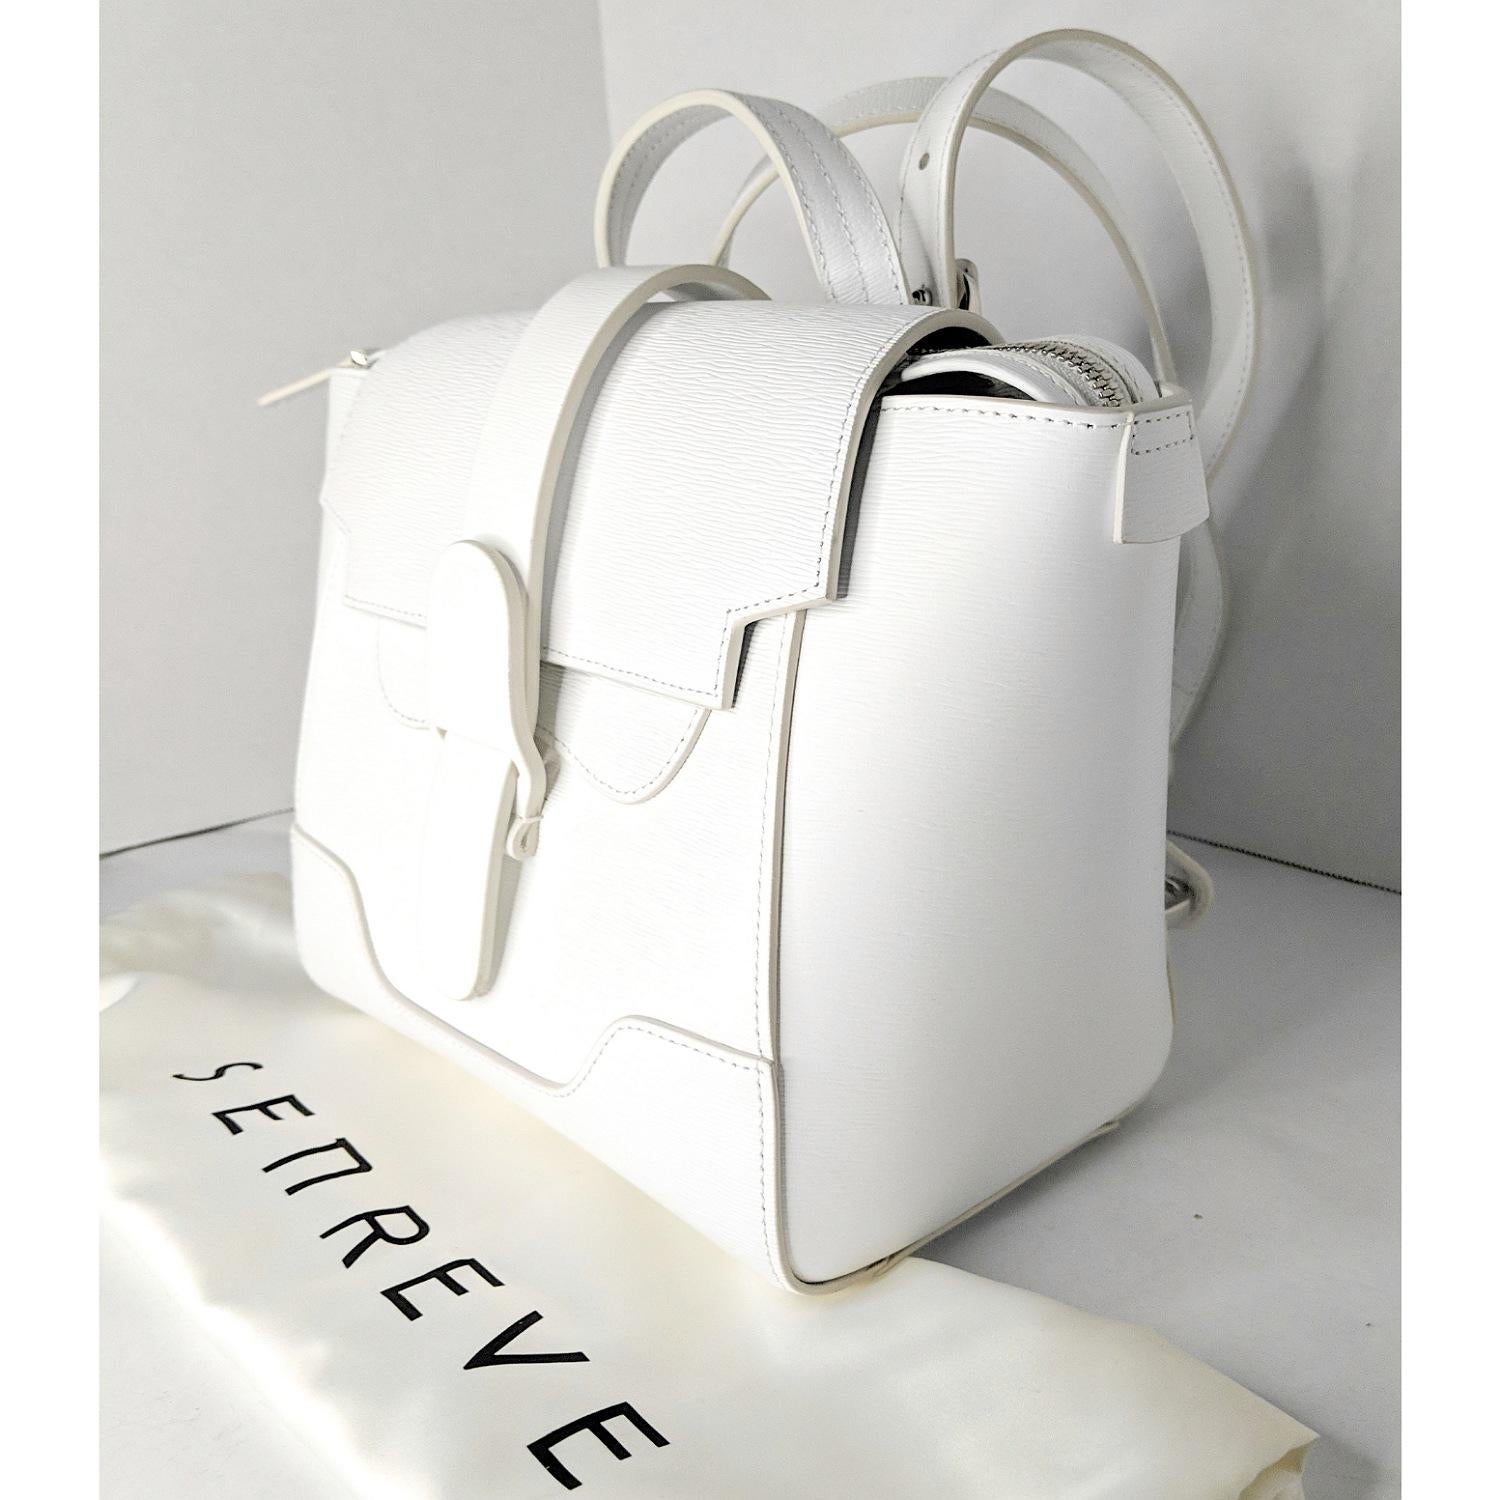 This stylish Senreve Mini Maestra Backpack is made of 100% genuine pebbled Calfskin leather in White with silver-tone hardware. Featuring adjustable straps that can be worn as a either a backpack or as a cross body bag. Secured by a flap closure